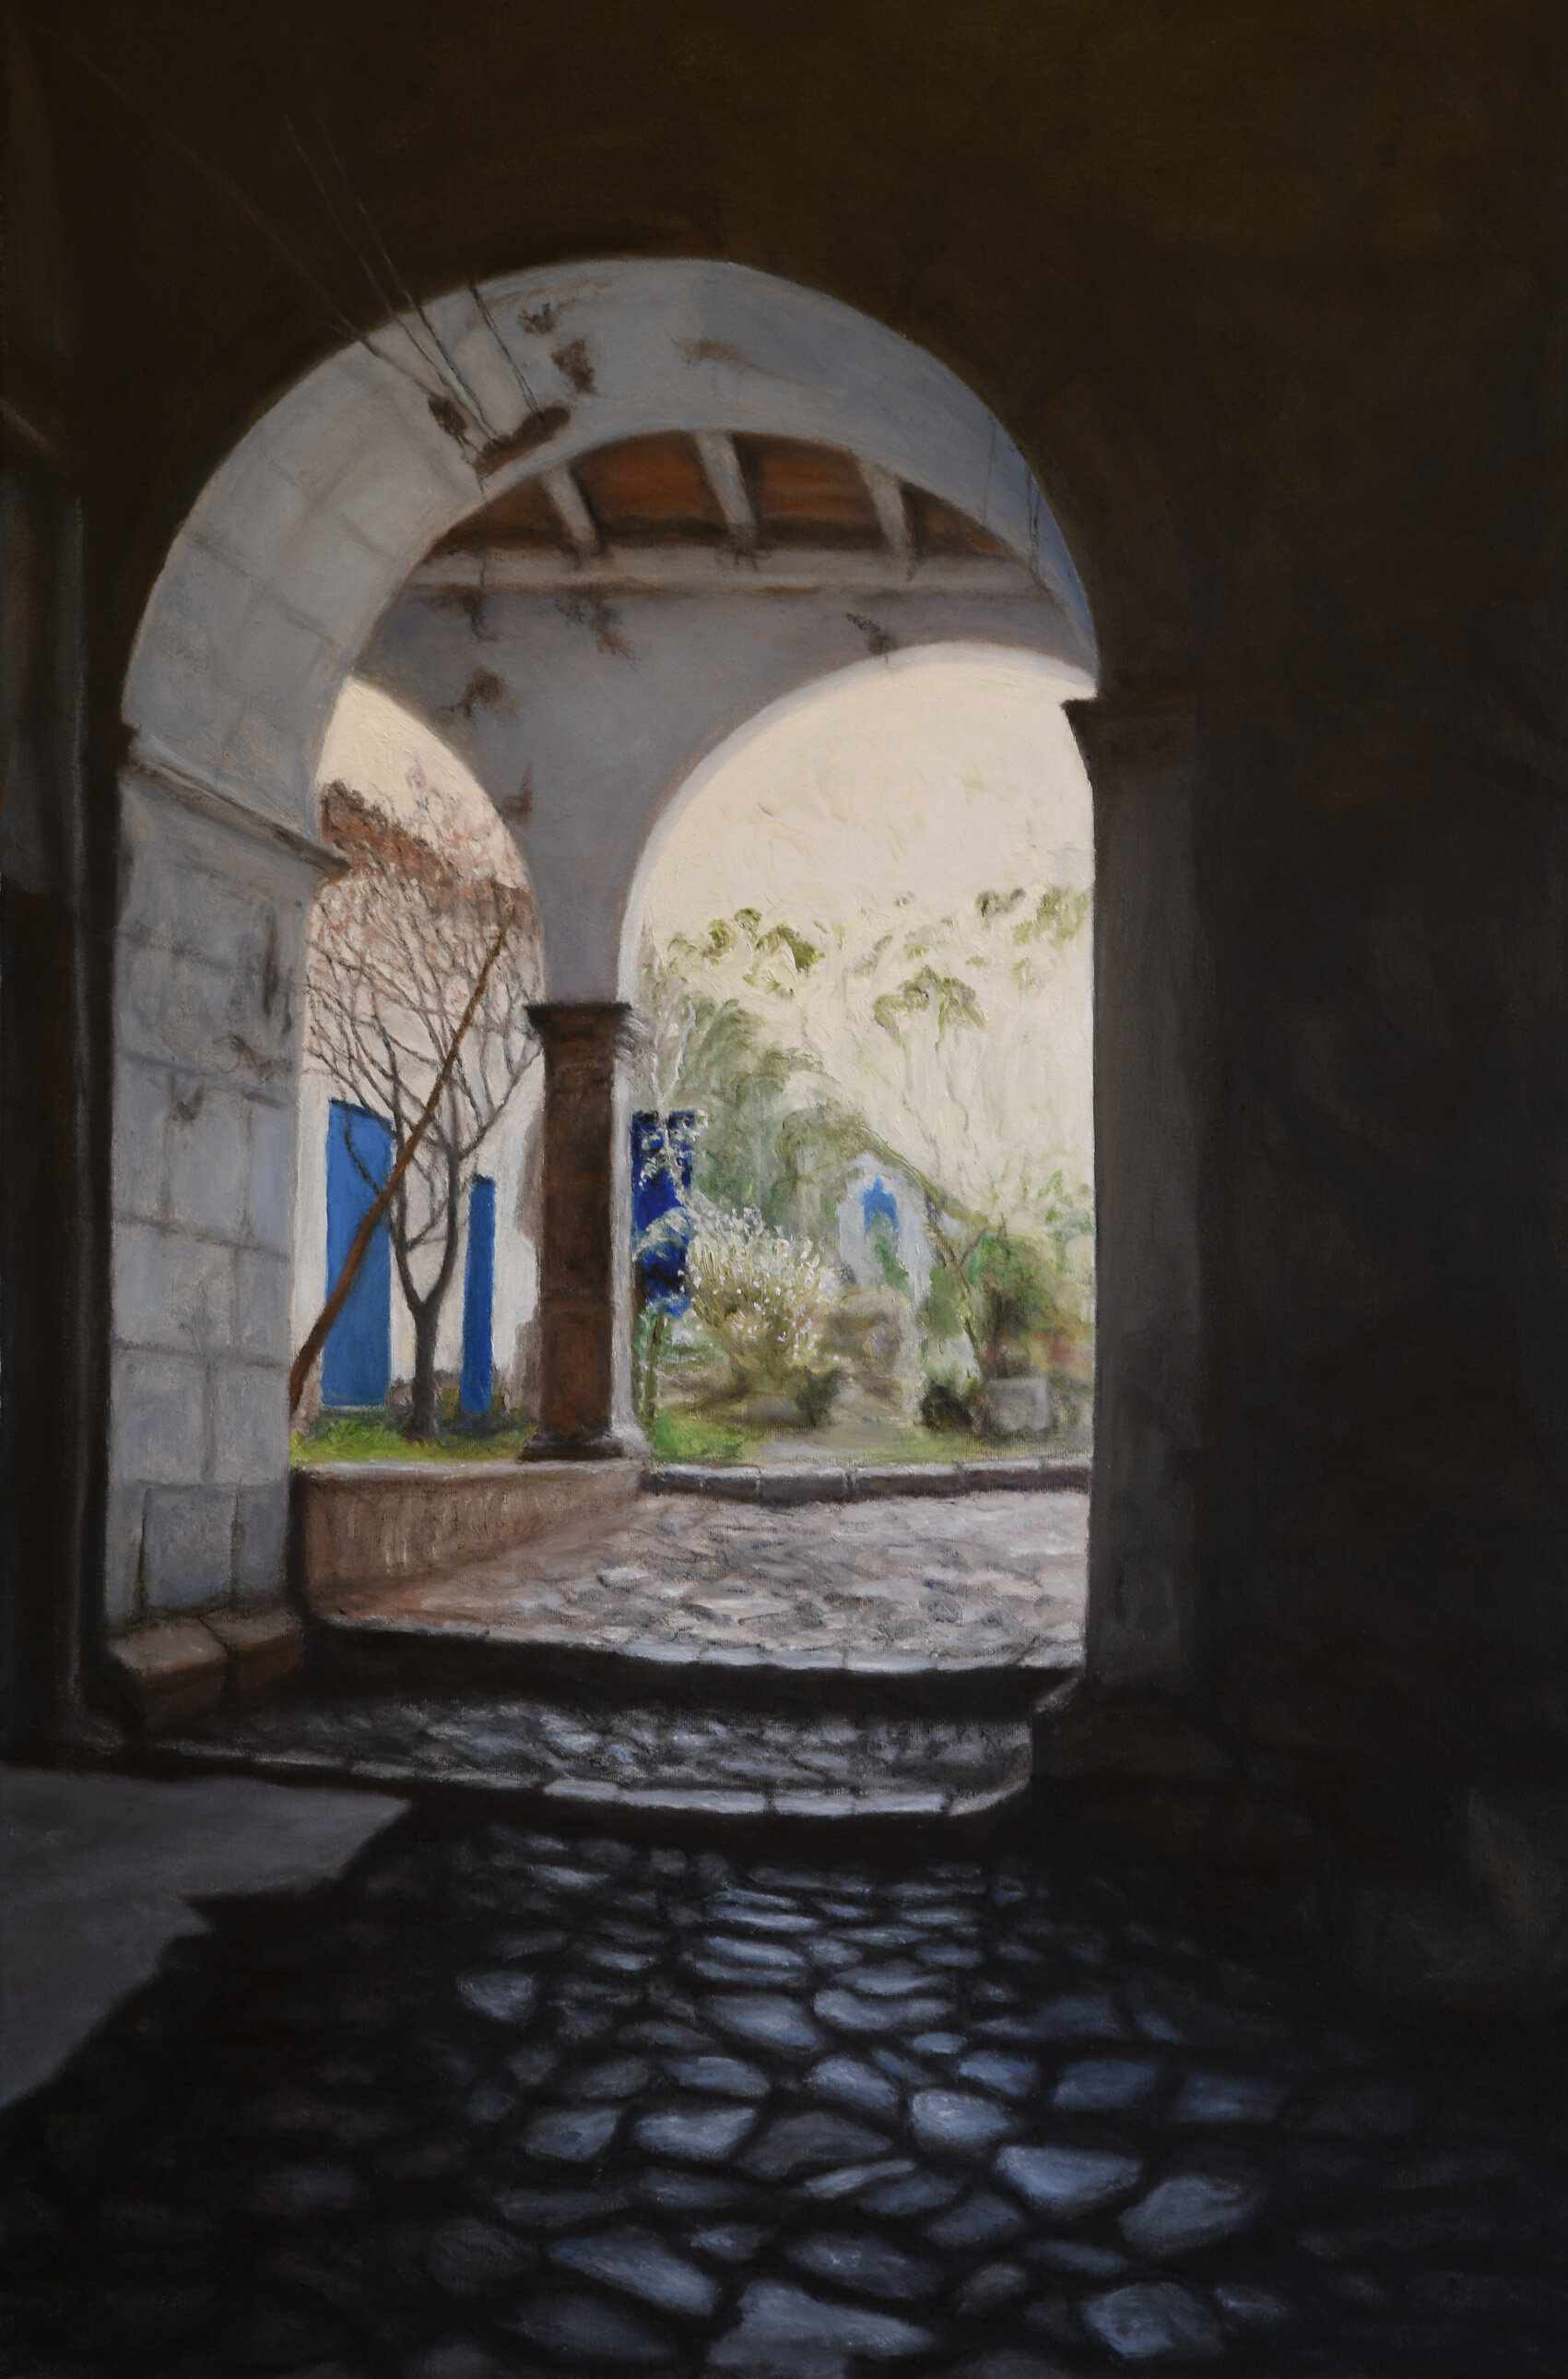  Into the Courtyard  oil on canvas framed  24 x 36””  $975 